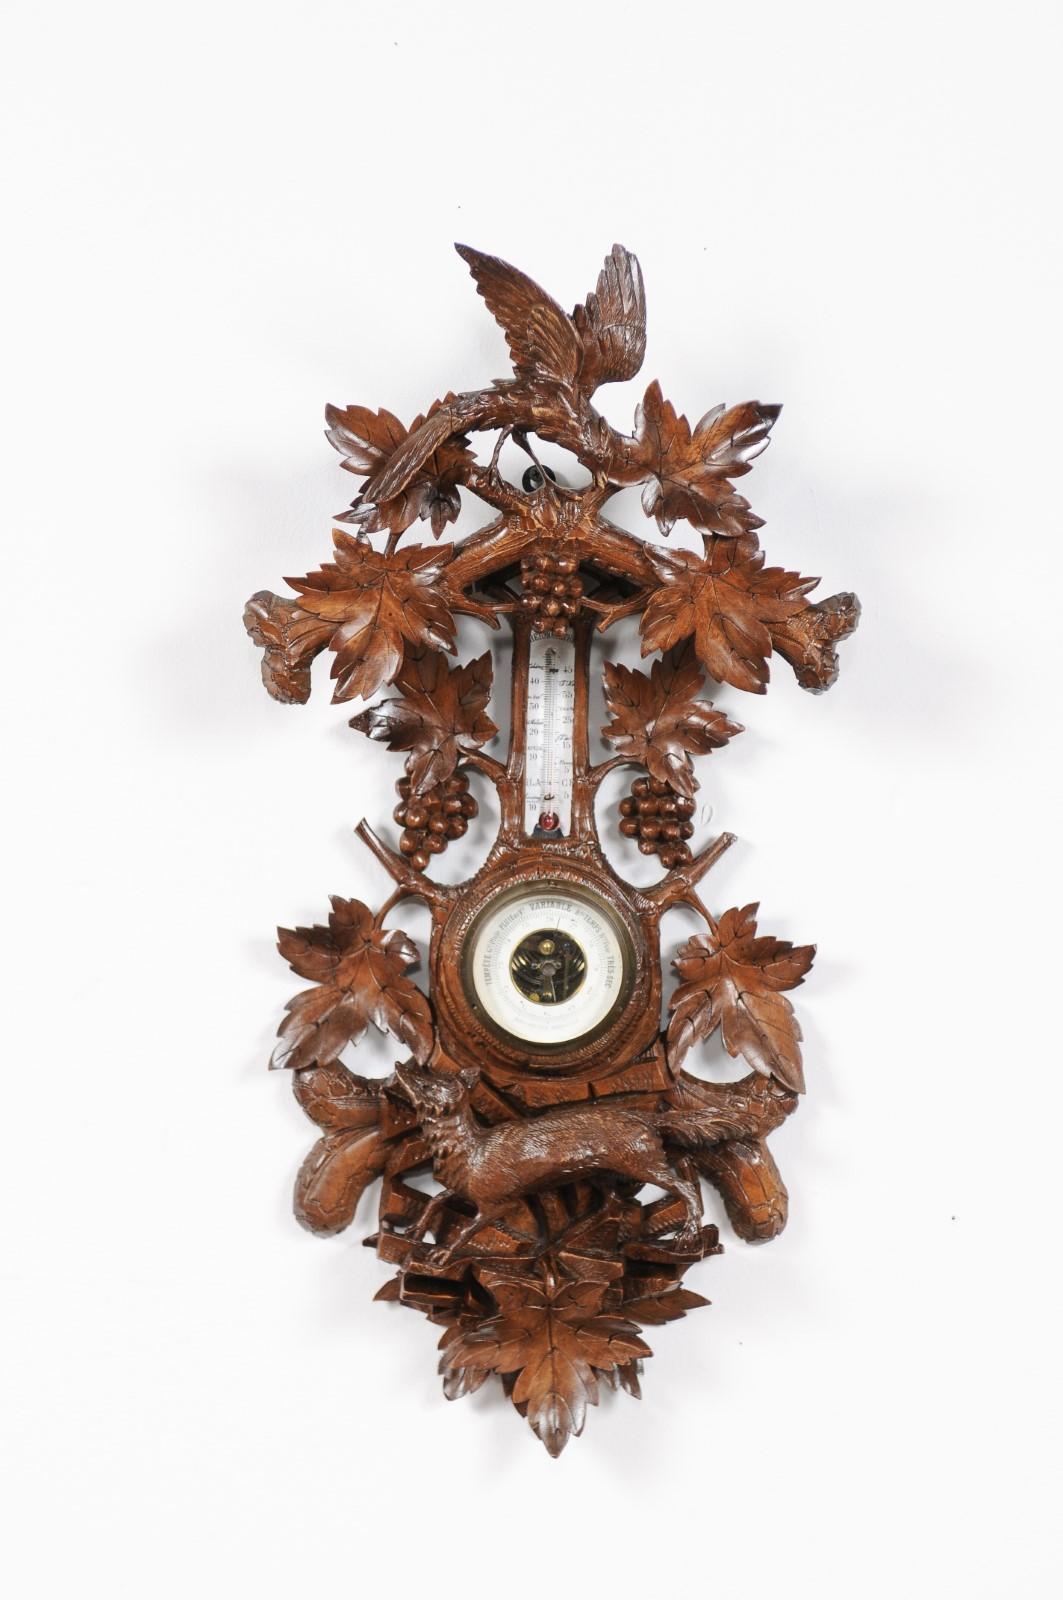 A Black Forest aneroid barometer and thermometer from the first half of the 20th century, with foliage, bird and fox. This exquisite Black Forest barometer features a beautifully hand carved frame, presenting lucious foliage and branches on which a